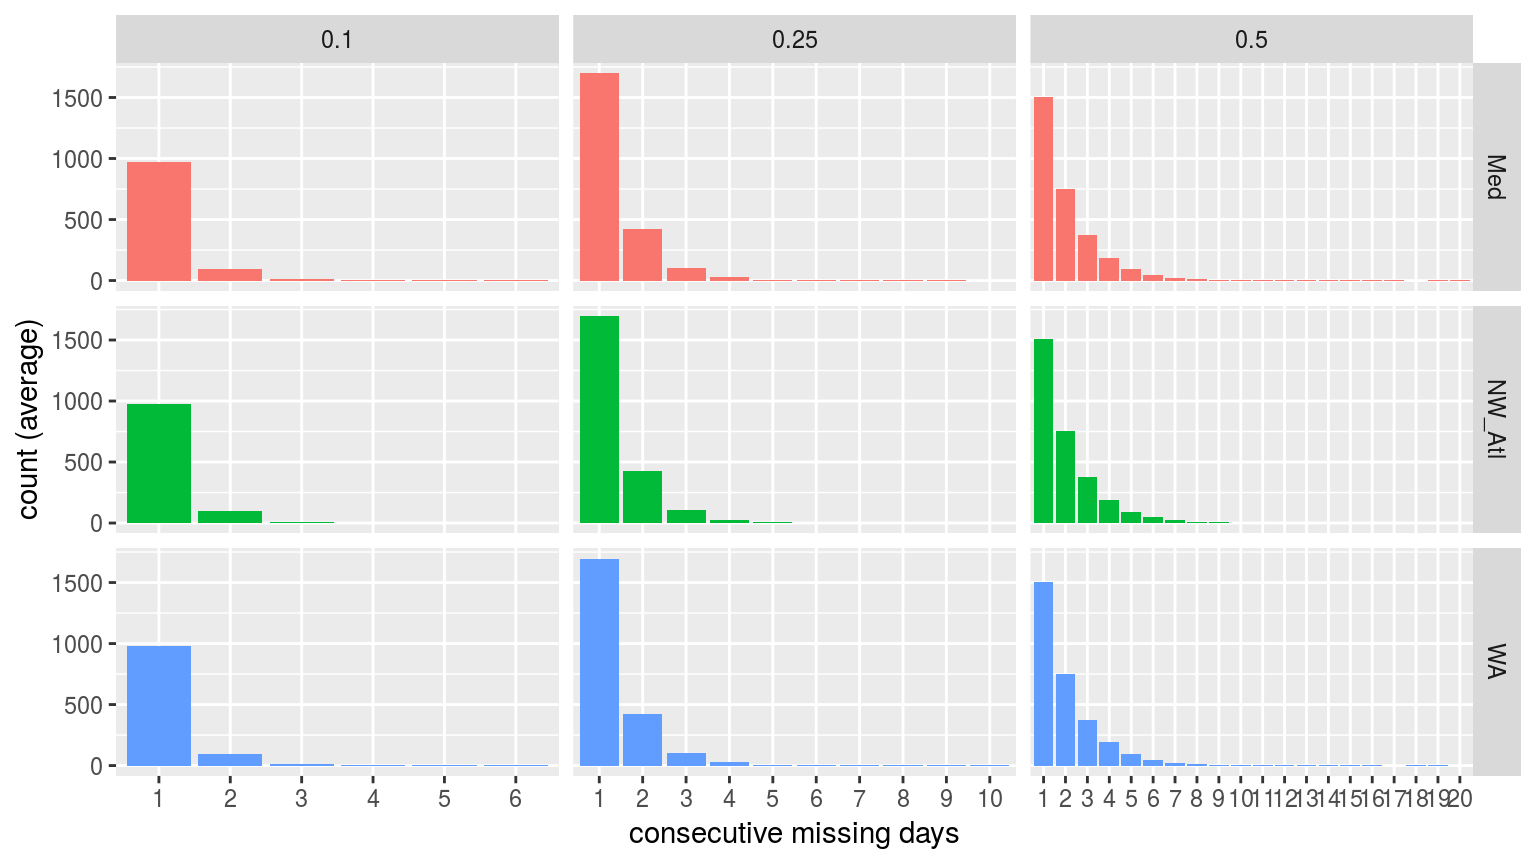 Bar plots showing the average count of consecutive missing days of data per time series at the different missing proportions.